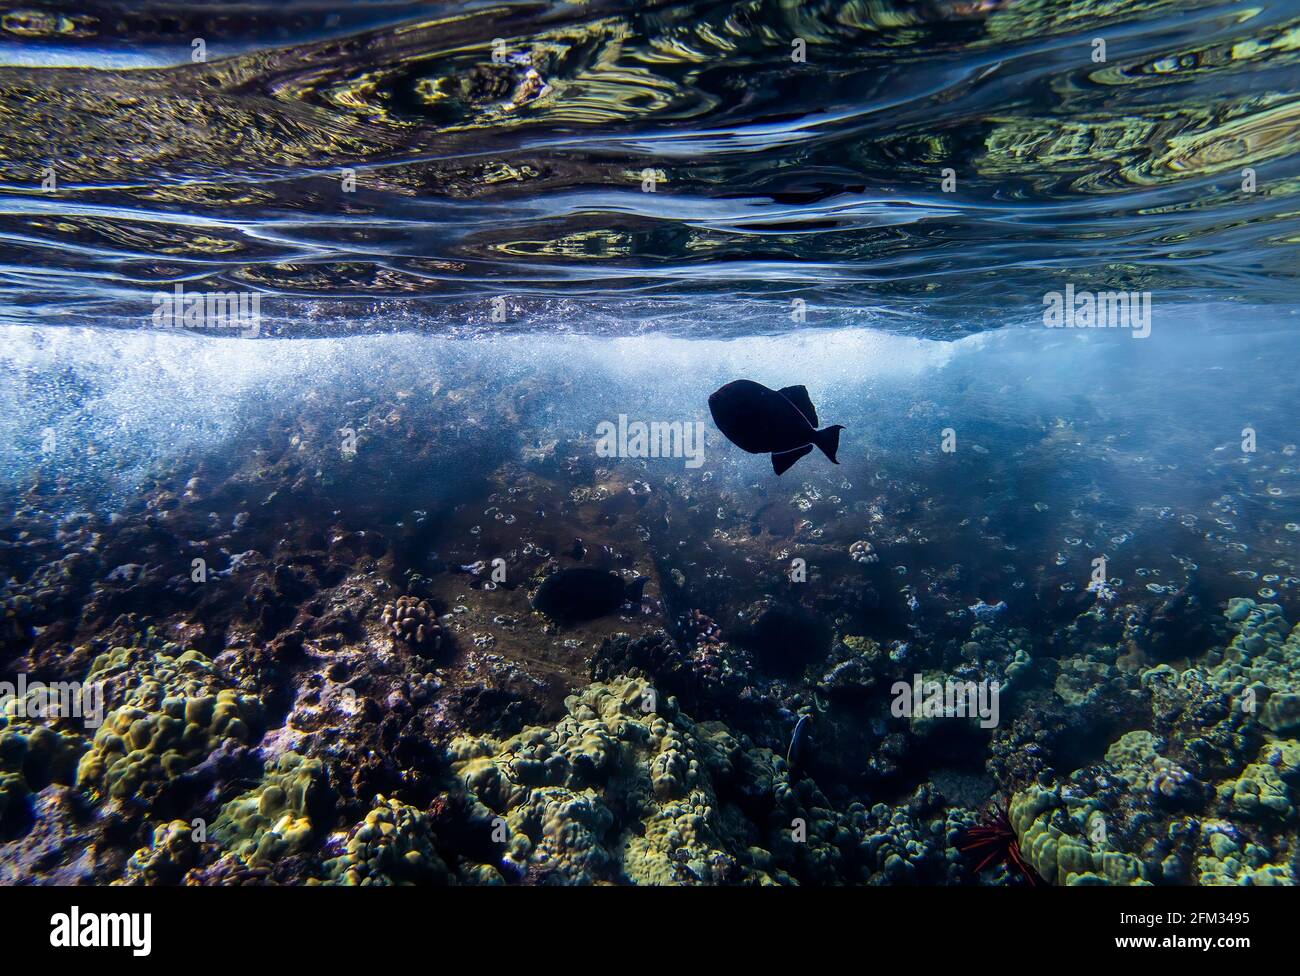 Black tropical fish over coral reef reflected in underside of ocean surface artistic image from Hawaii. Stock Photo